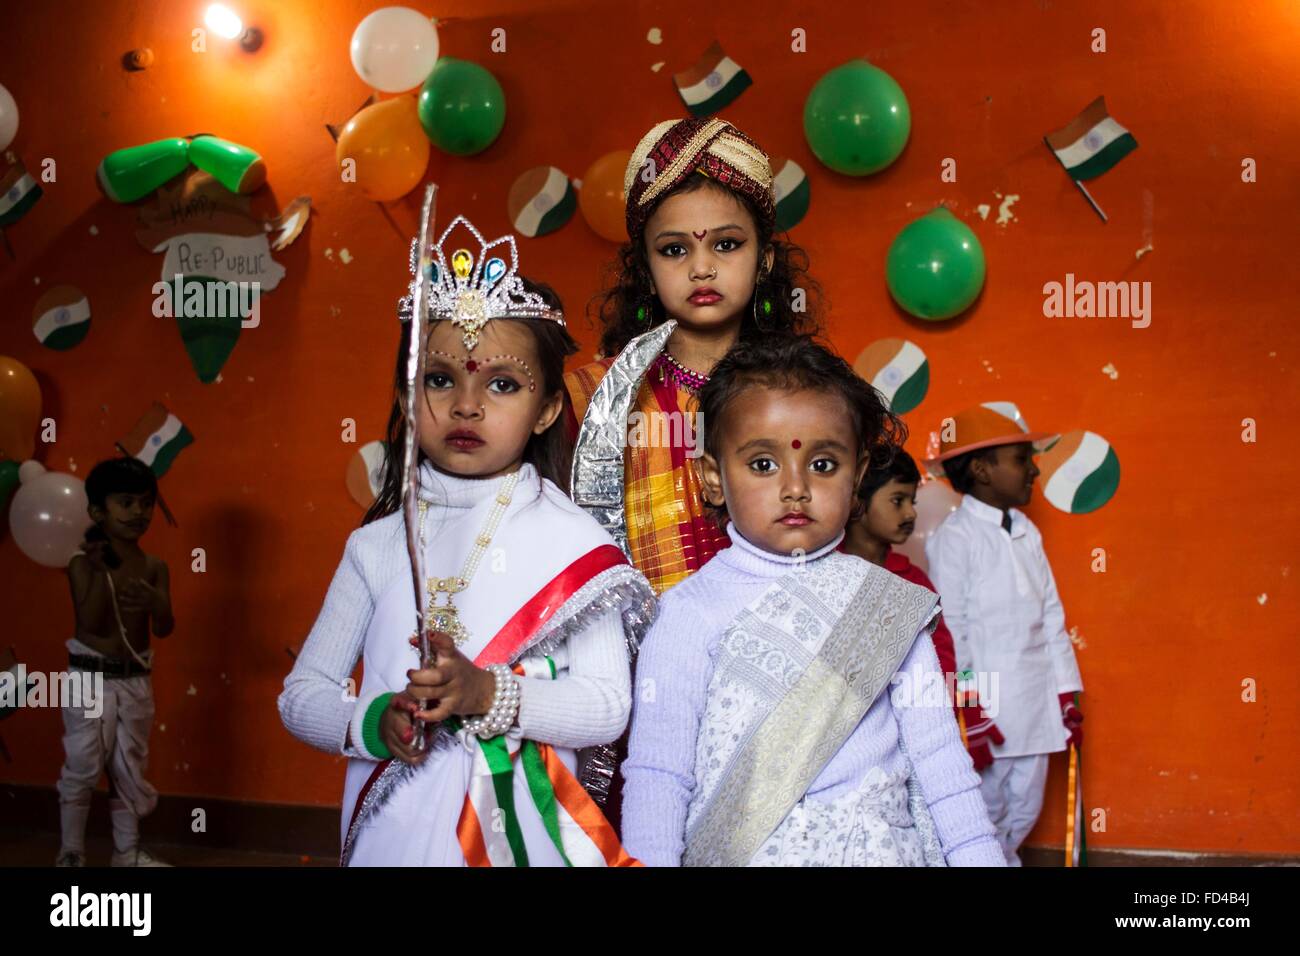 Uttar Pradesh, India. 26th Jan, 2016. Girls dressed as Bharat mata, Rani laxmi bai, gathered to celebrate 67th republic day in Tarang pre school at Karwi /Chitrakoot . Republic Day honors the date on which the Constitution of India came into force on 26 January 1950 replacing the Government of India Act as the governing document of India. © Akshay Gupta/Pacific Press/Alamy Live News Stock Photo